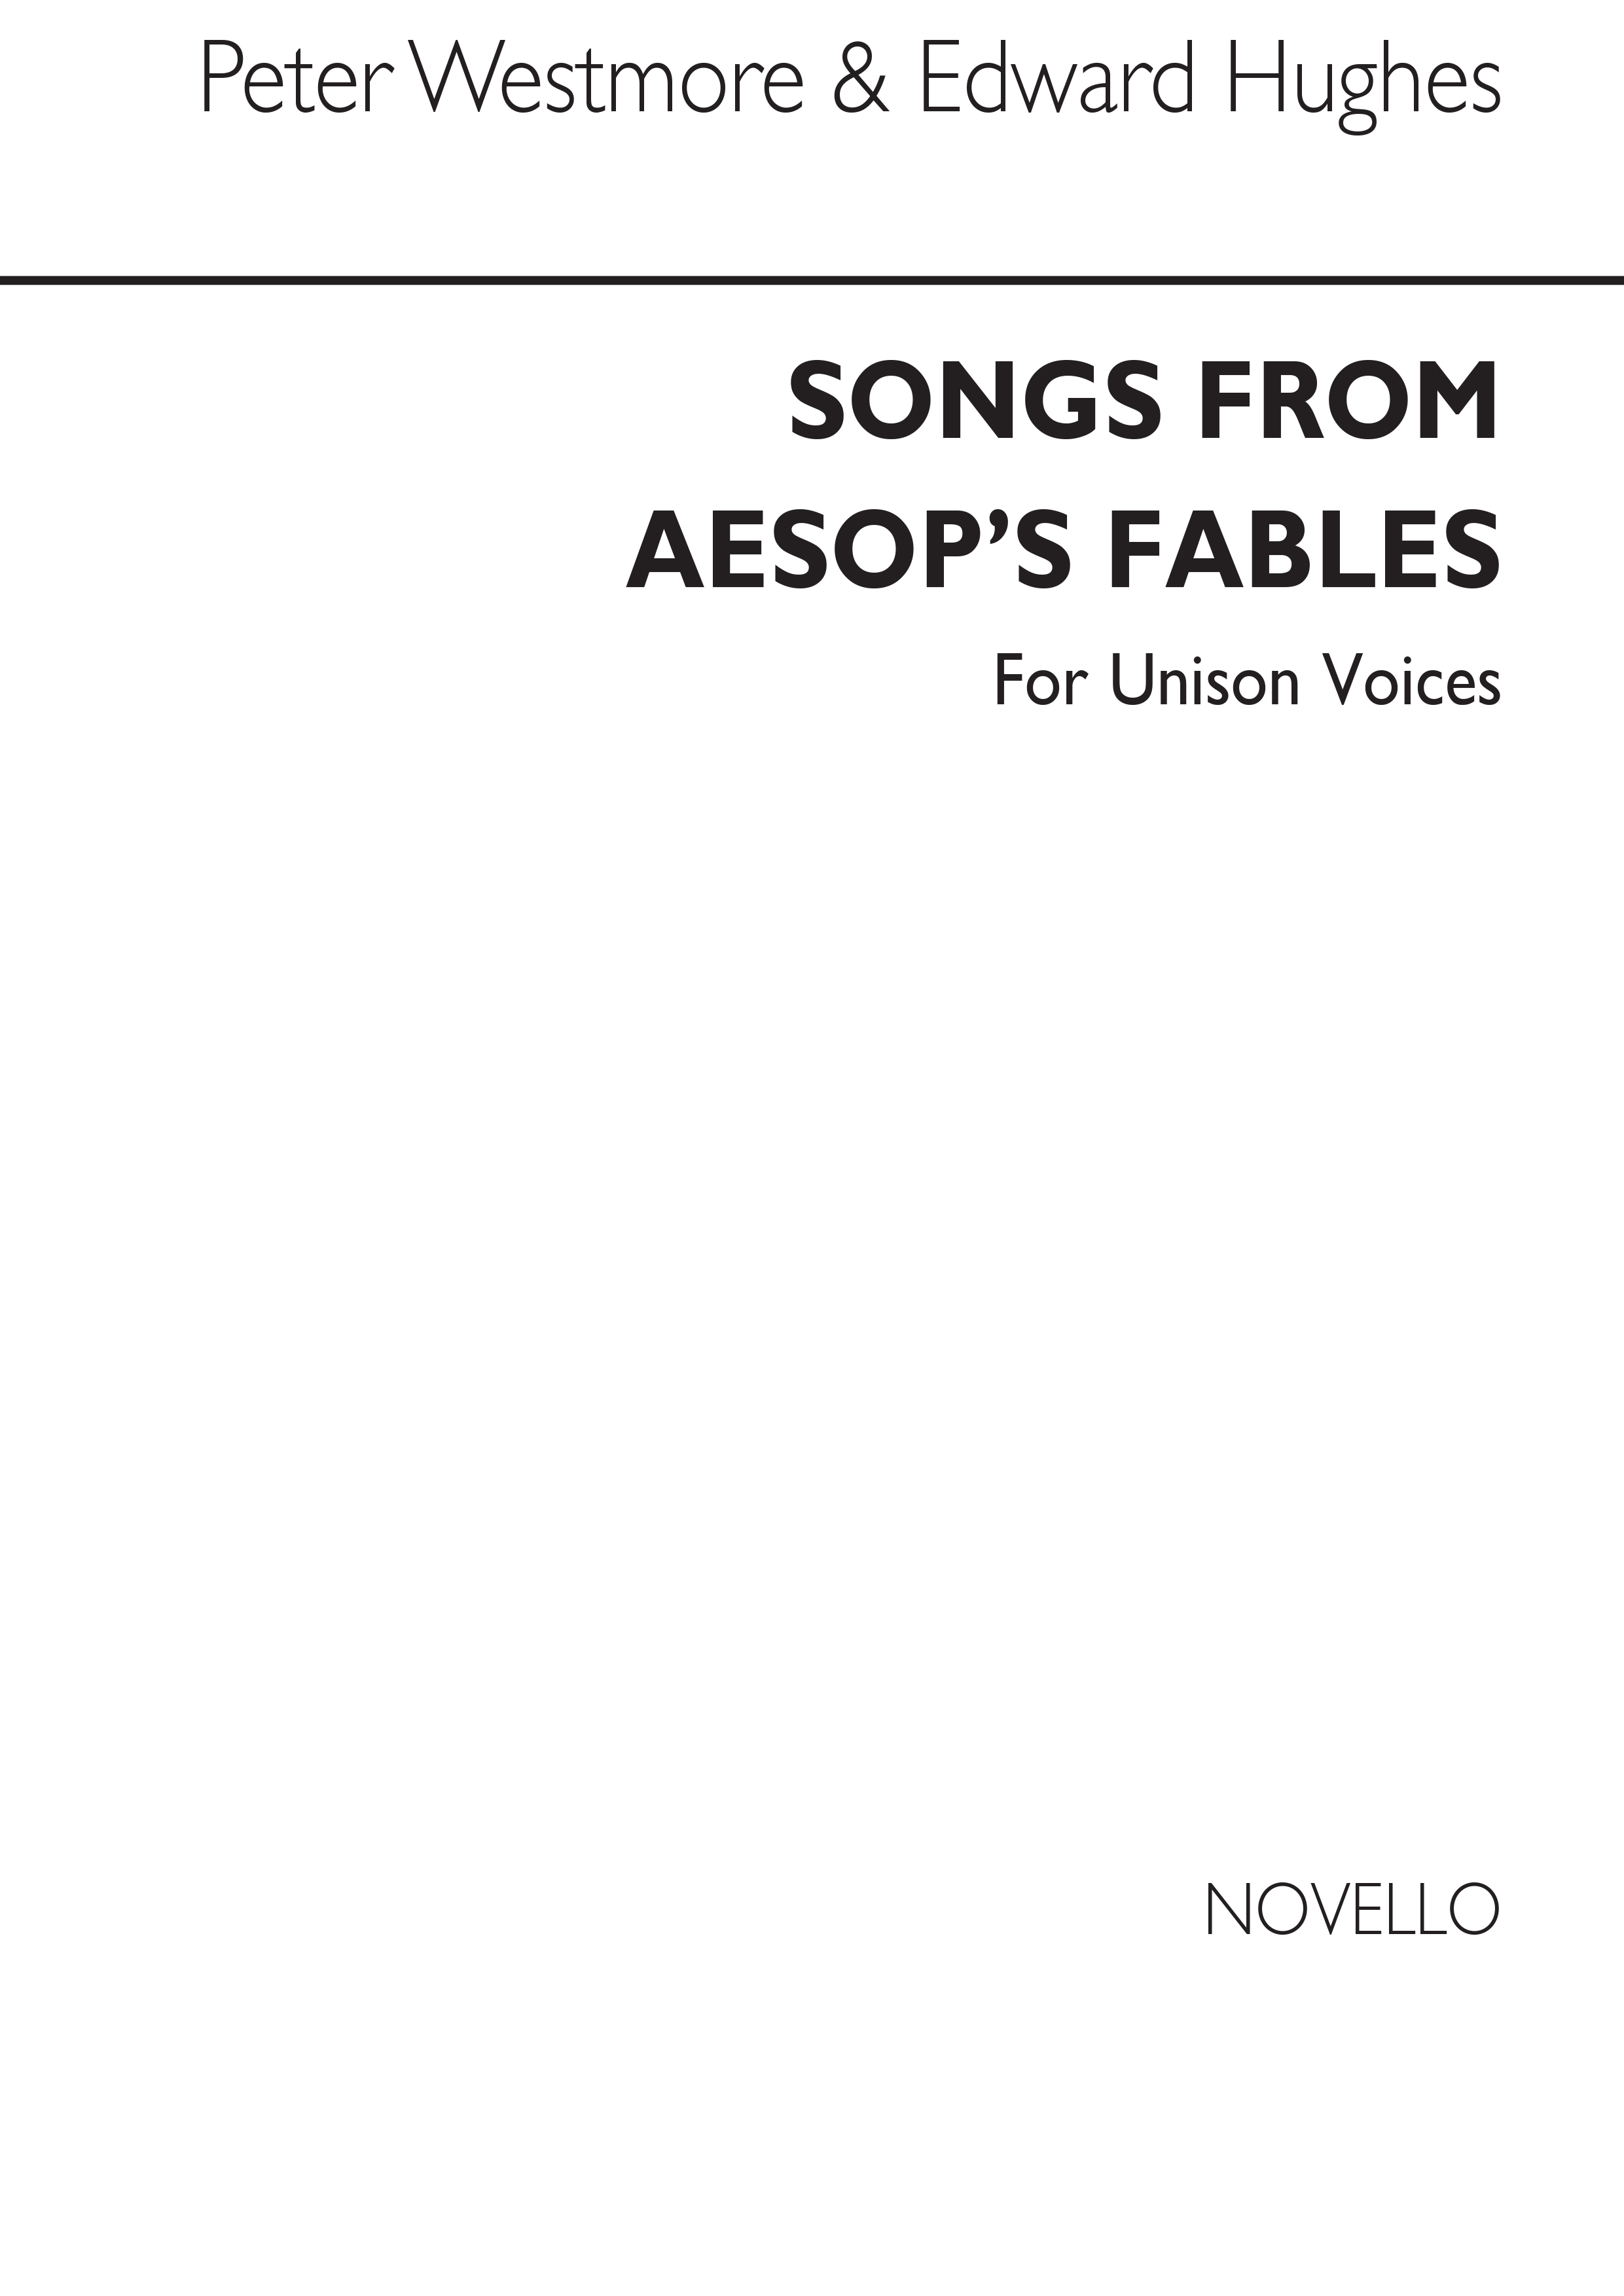 Hughes: Songs From Aesop's Fables for Unison Voices